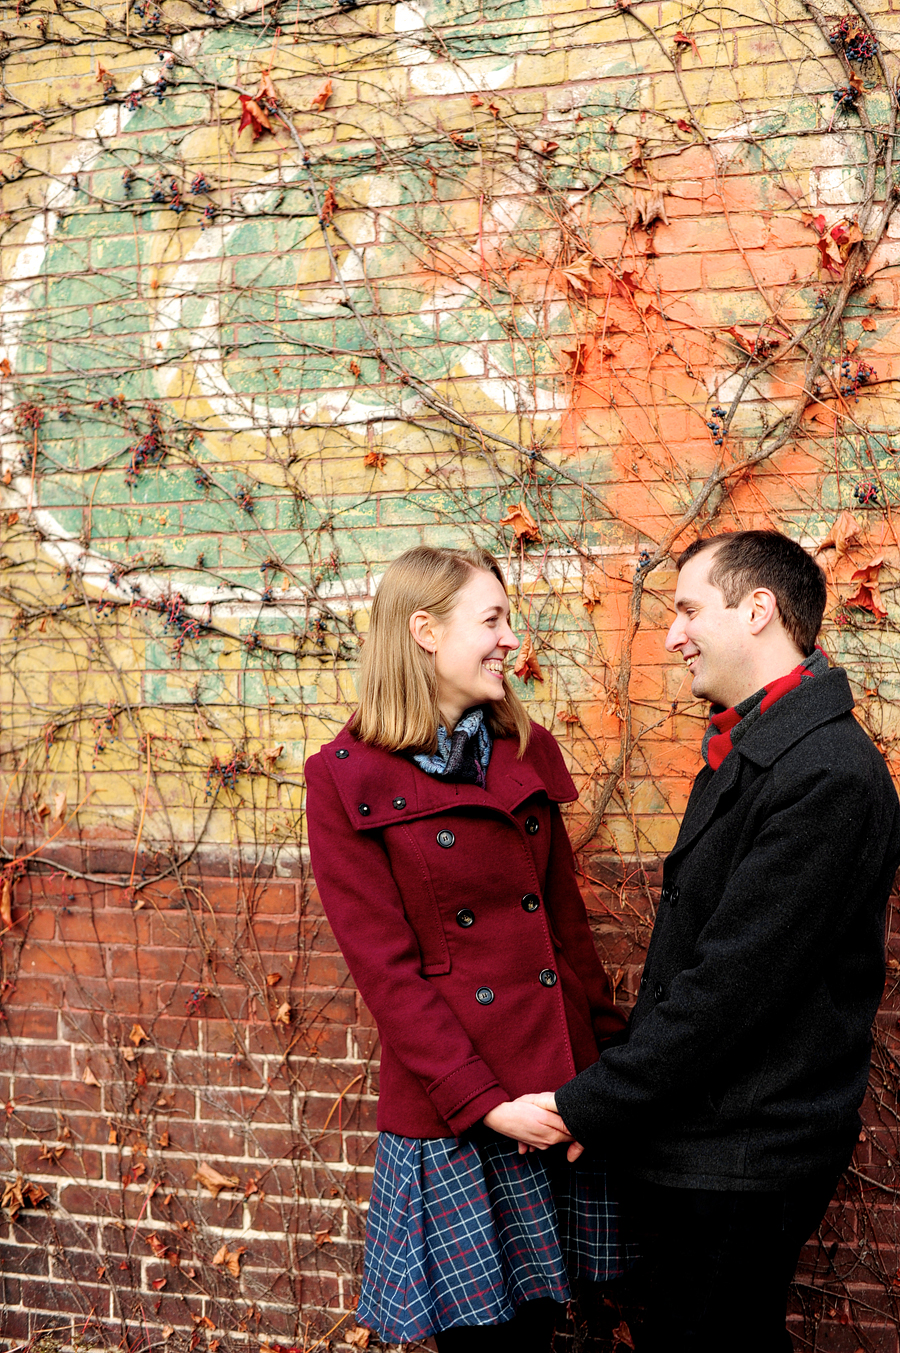 early winter engagement photos in portland, maine